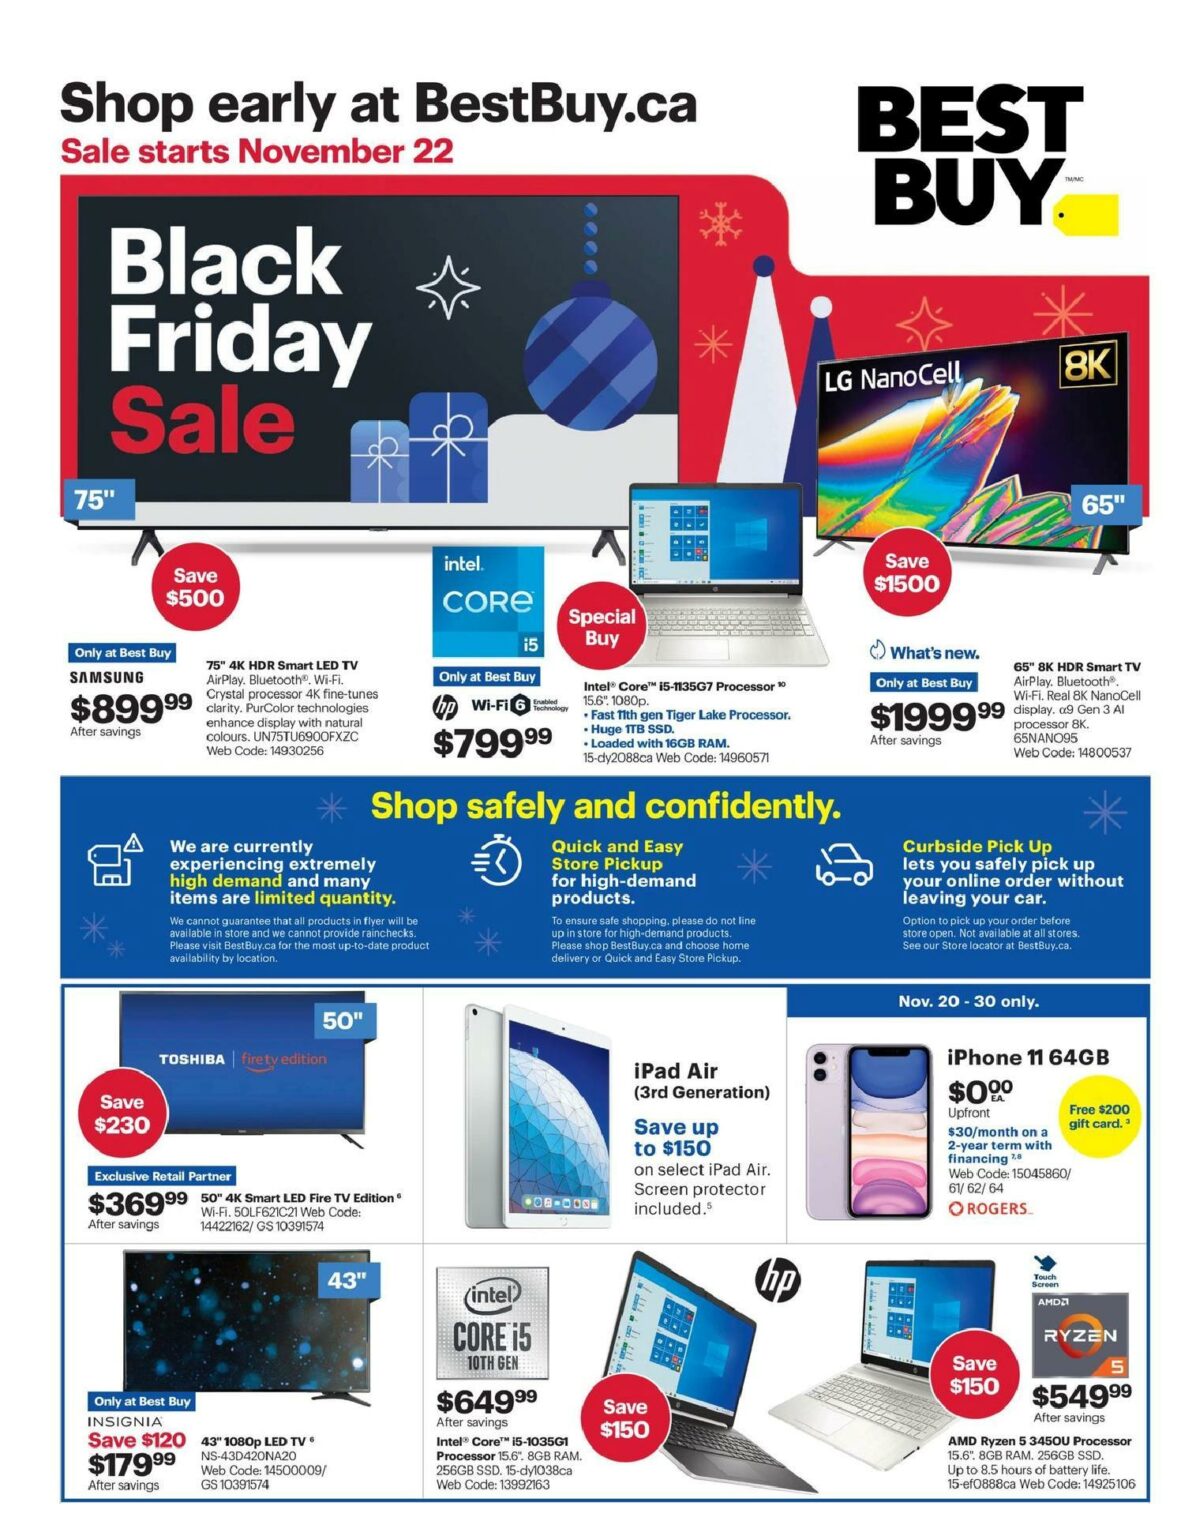 Best Buy Black Friday Flyer Deals 2020 Canada - What Online Stores Have The Best Black Friday Deals